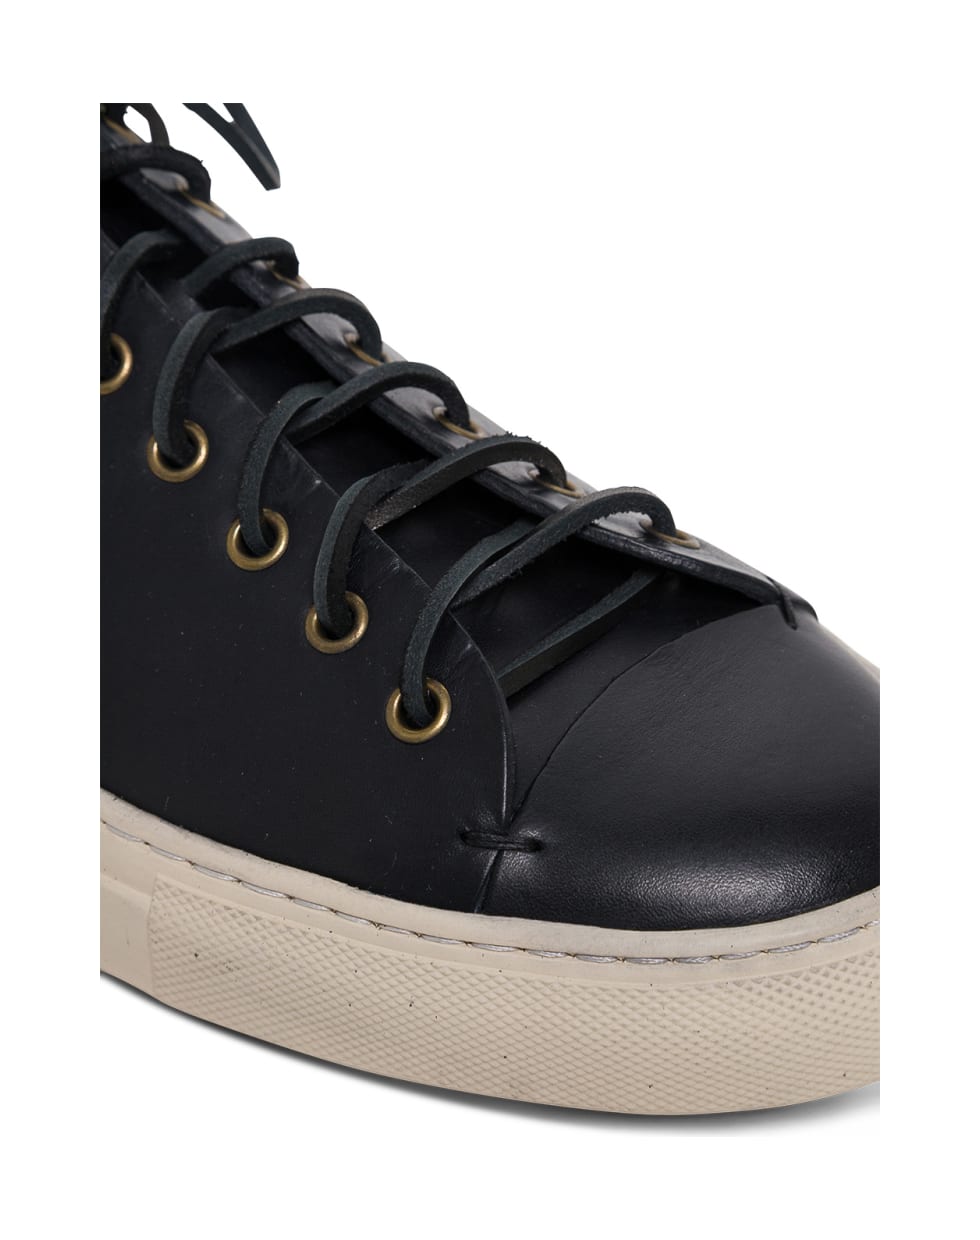 Buttero Black Leather Sneakers With Laces - Black